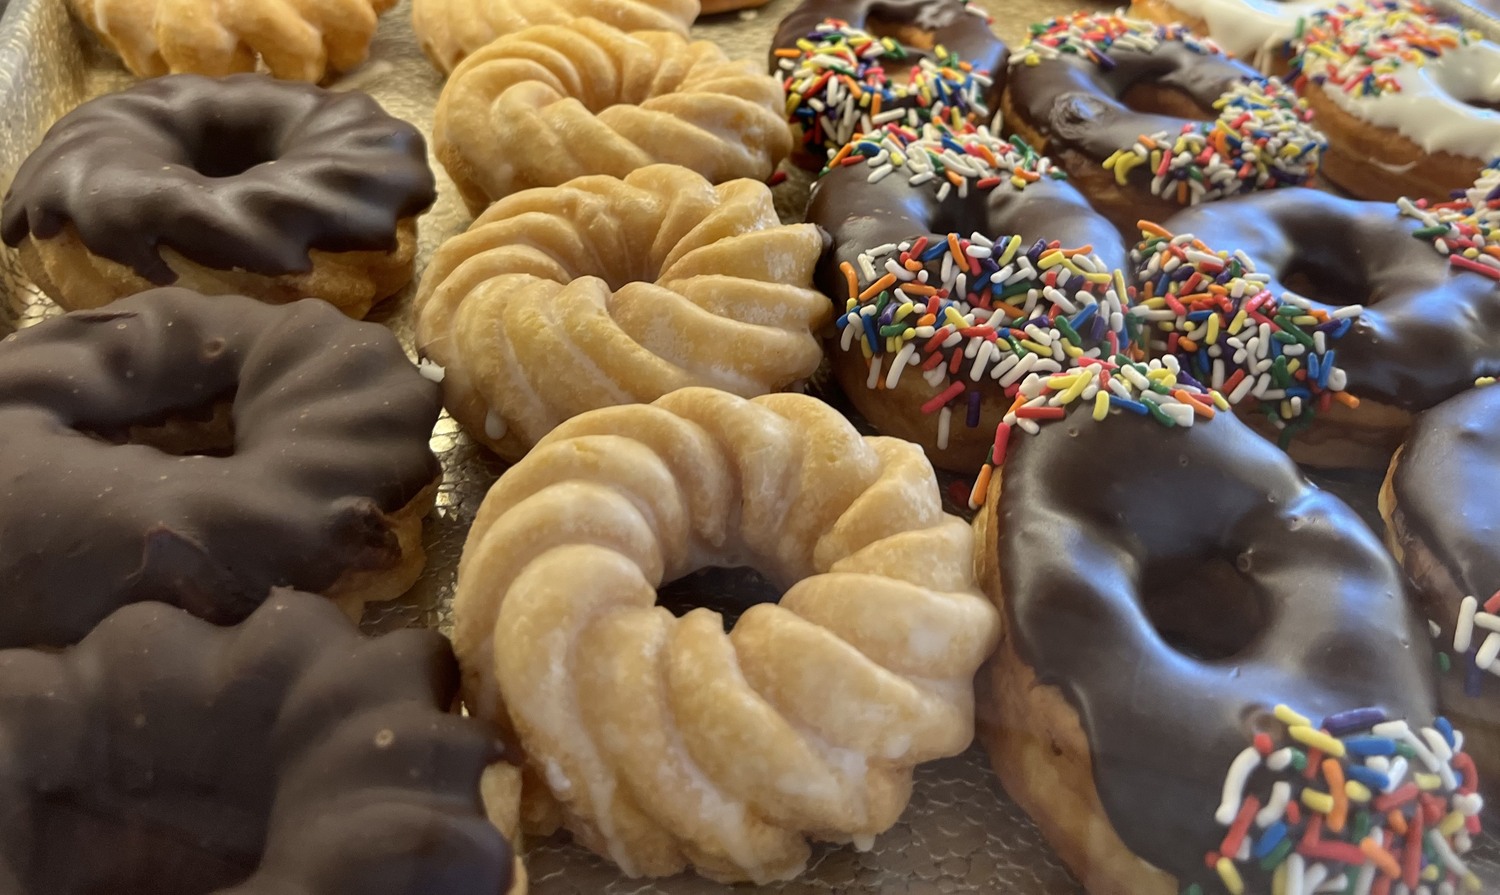 From Classic to Inventive: Doughnuts Are What’s for Breakfast on the East End